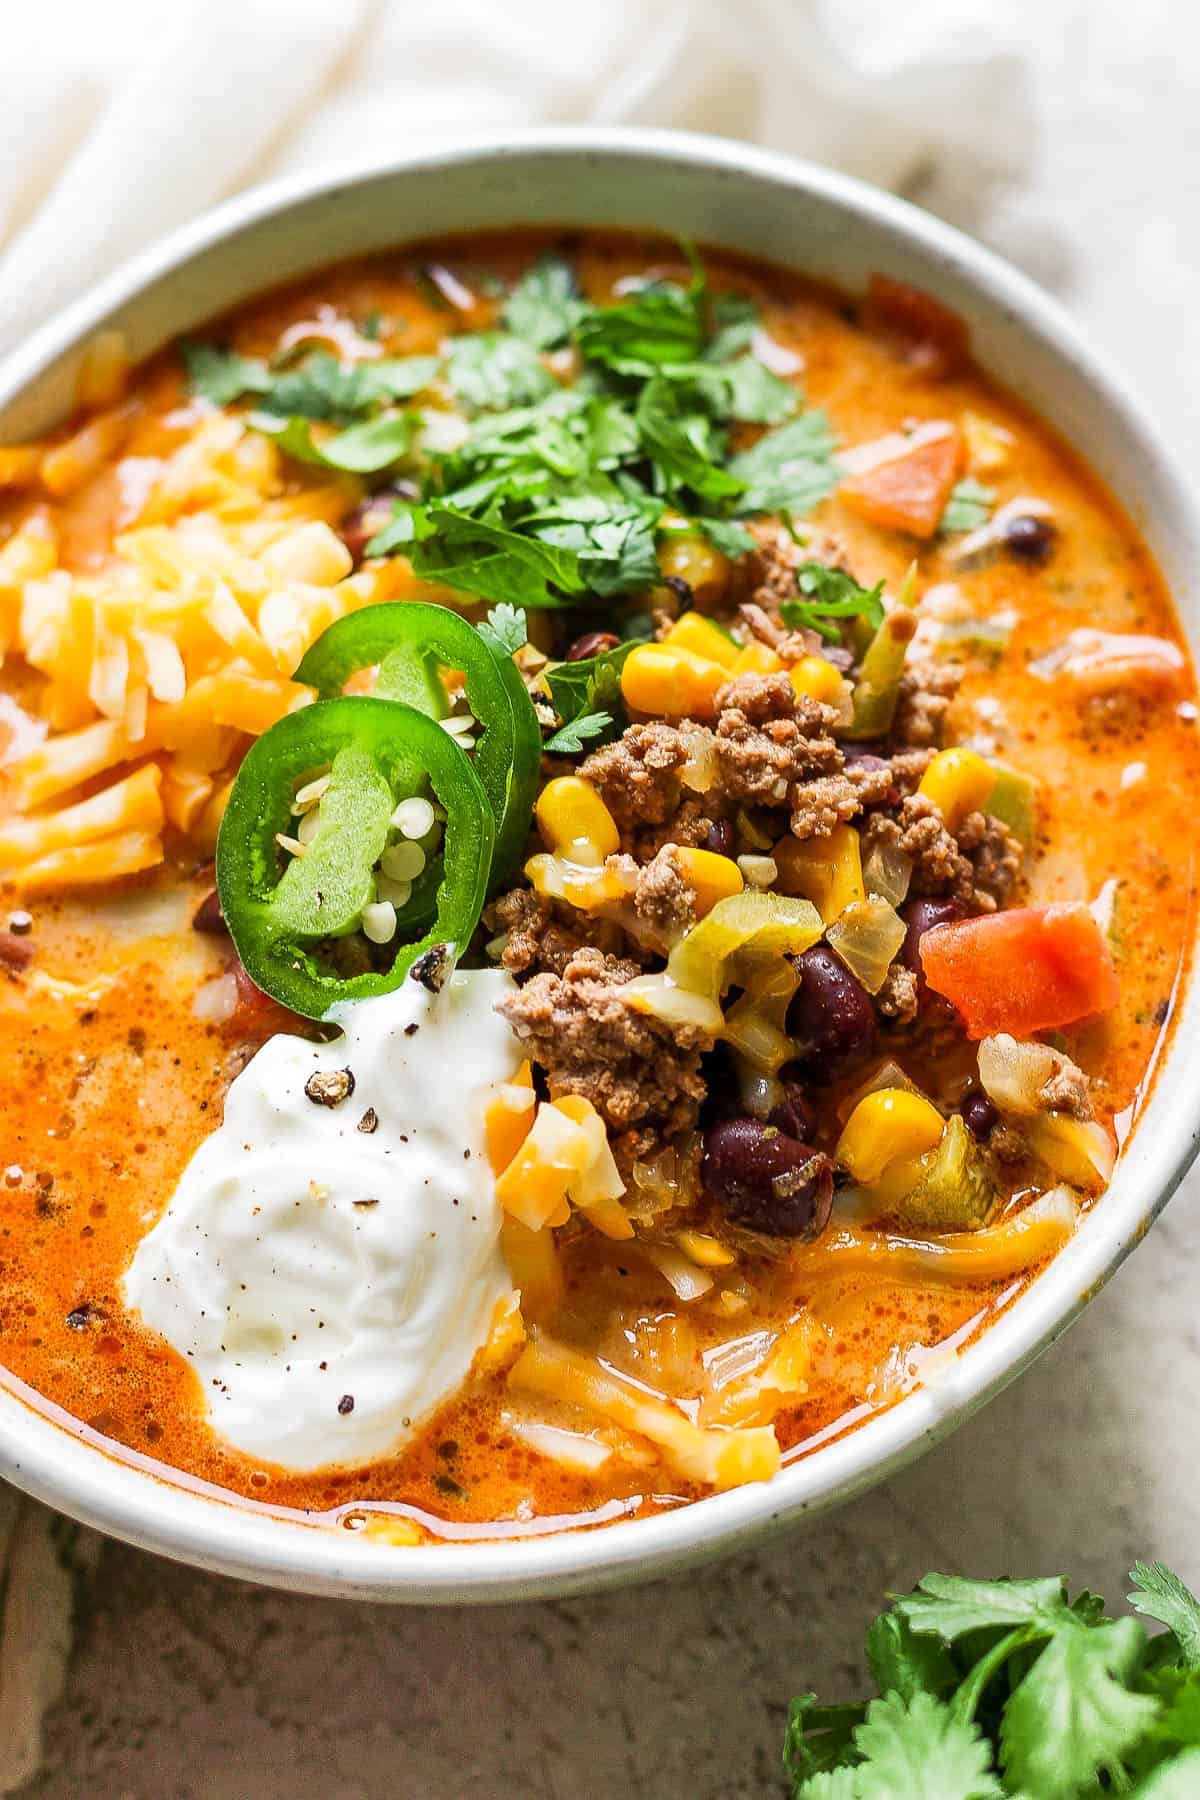 A fully garnished bowl of creamy taco soup.